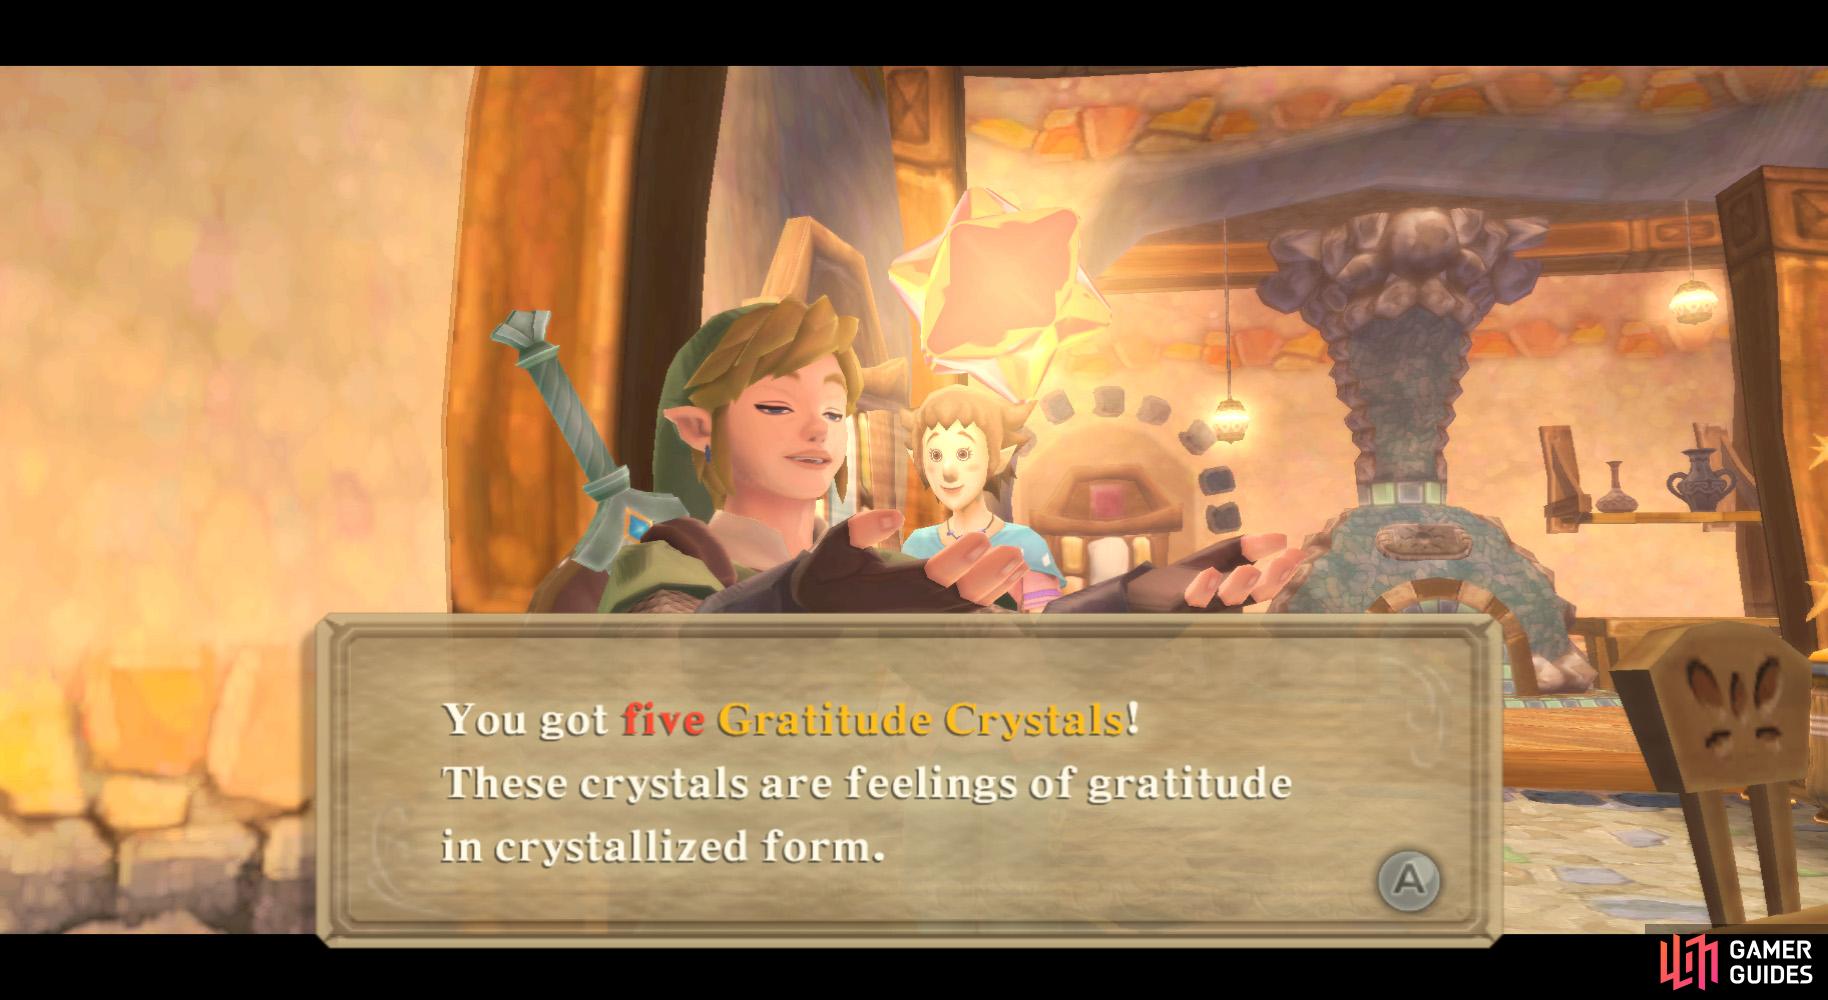 Link, you need to look more pleased with your reward.